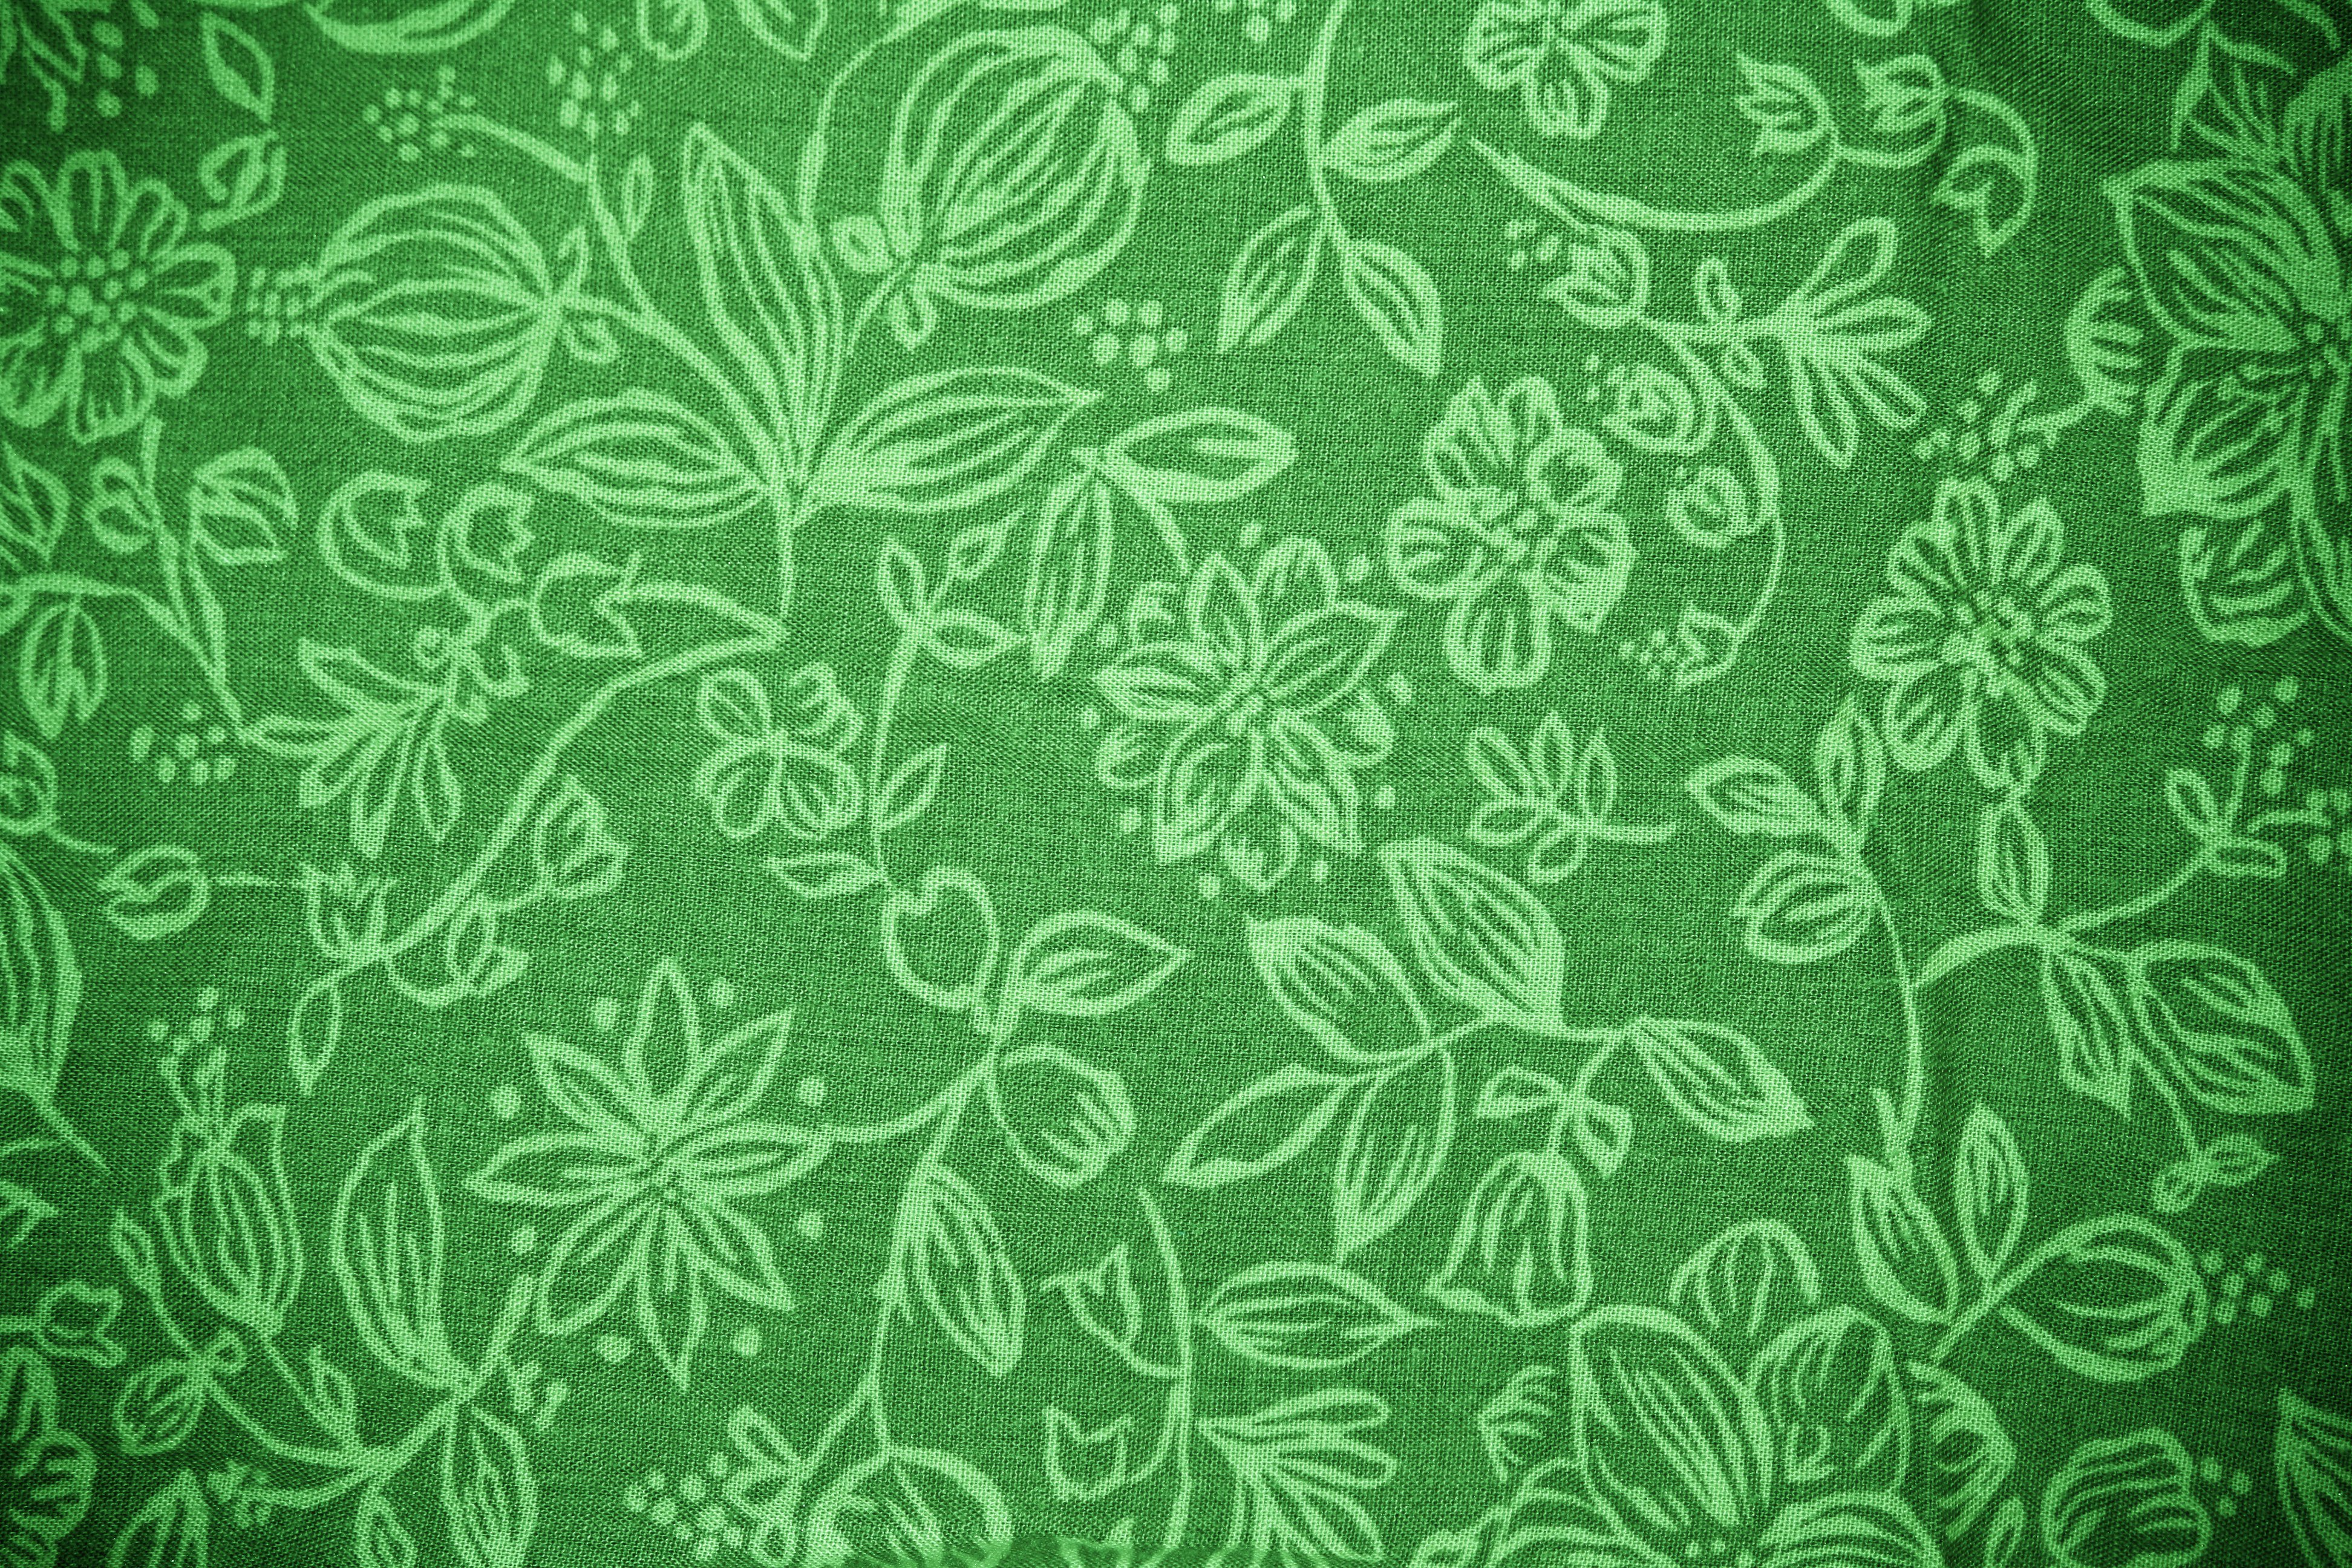 Green Fabric with Floral Pattern Texture   Free High Resolution Photo